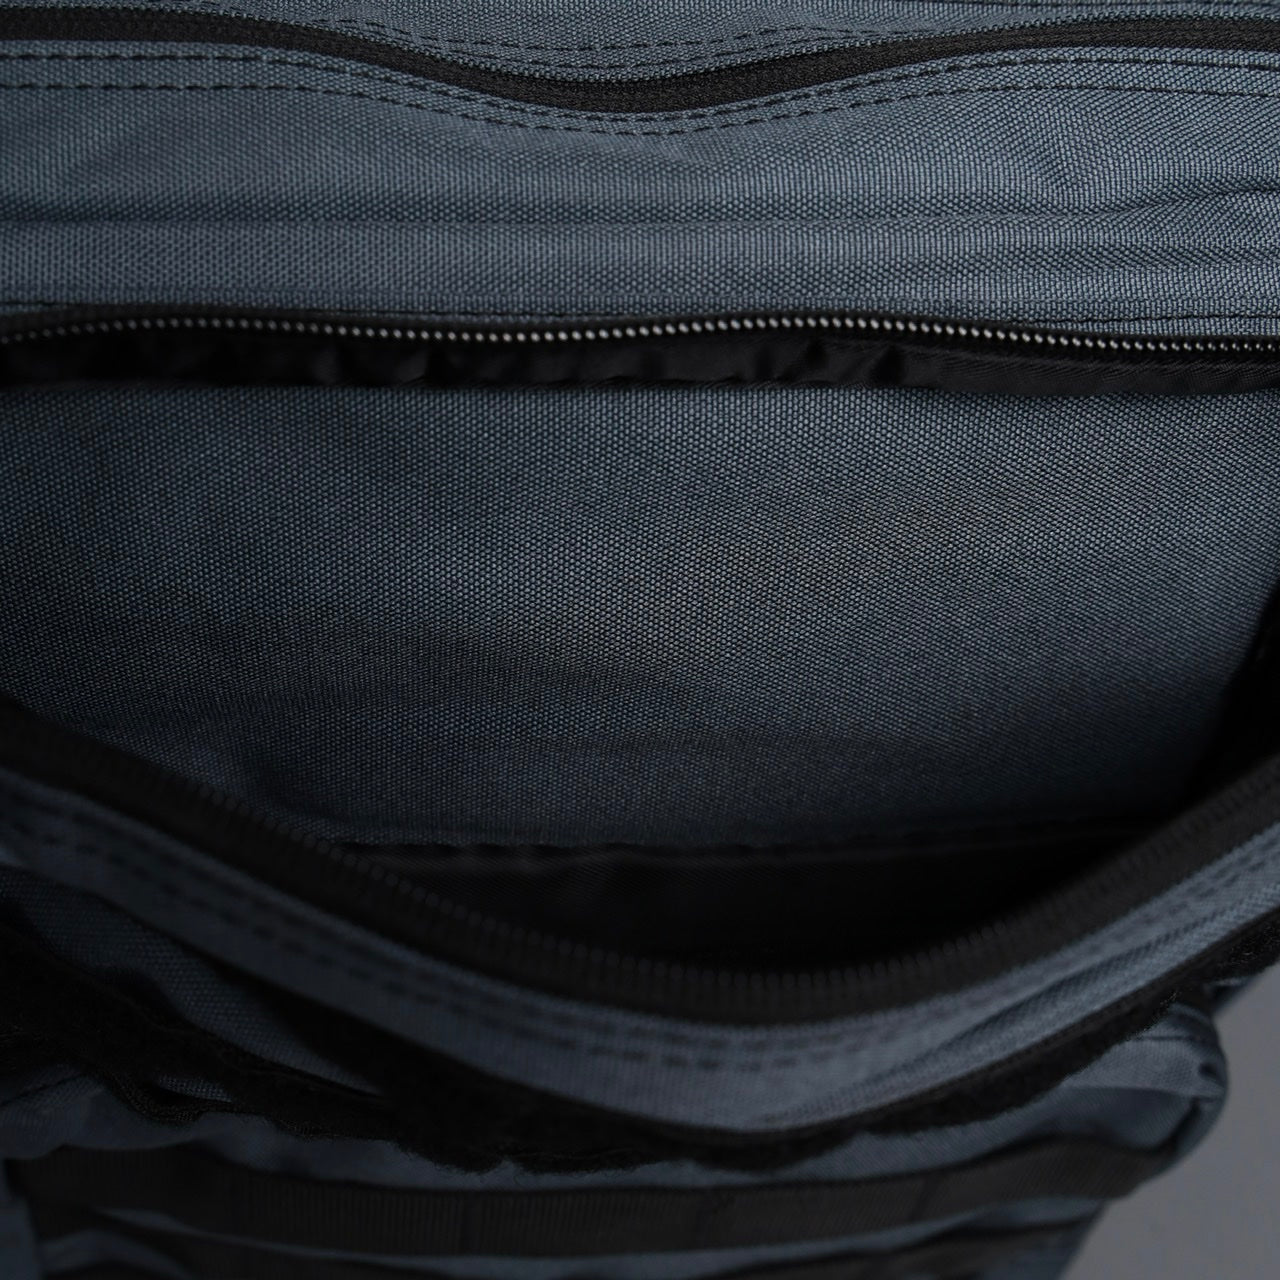 35L Backpack Iron Grey